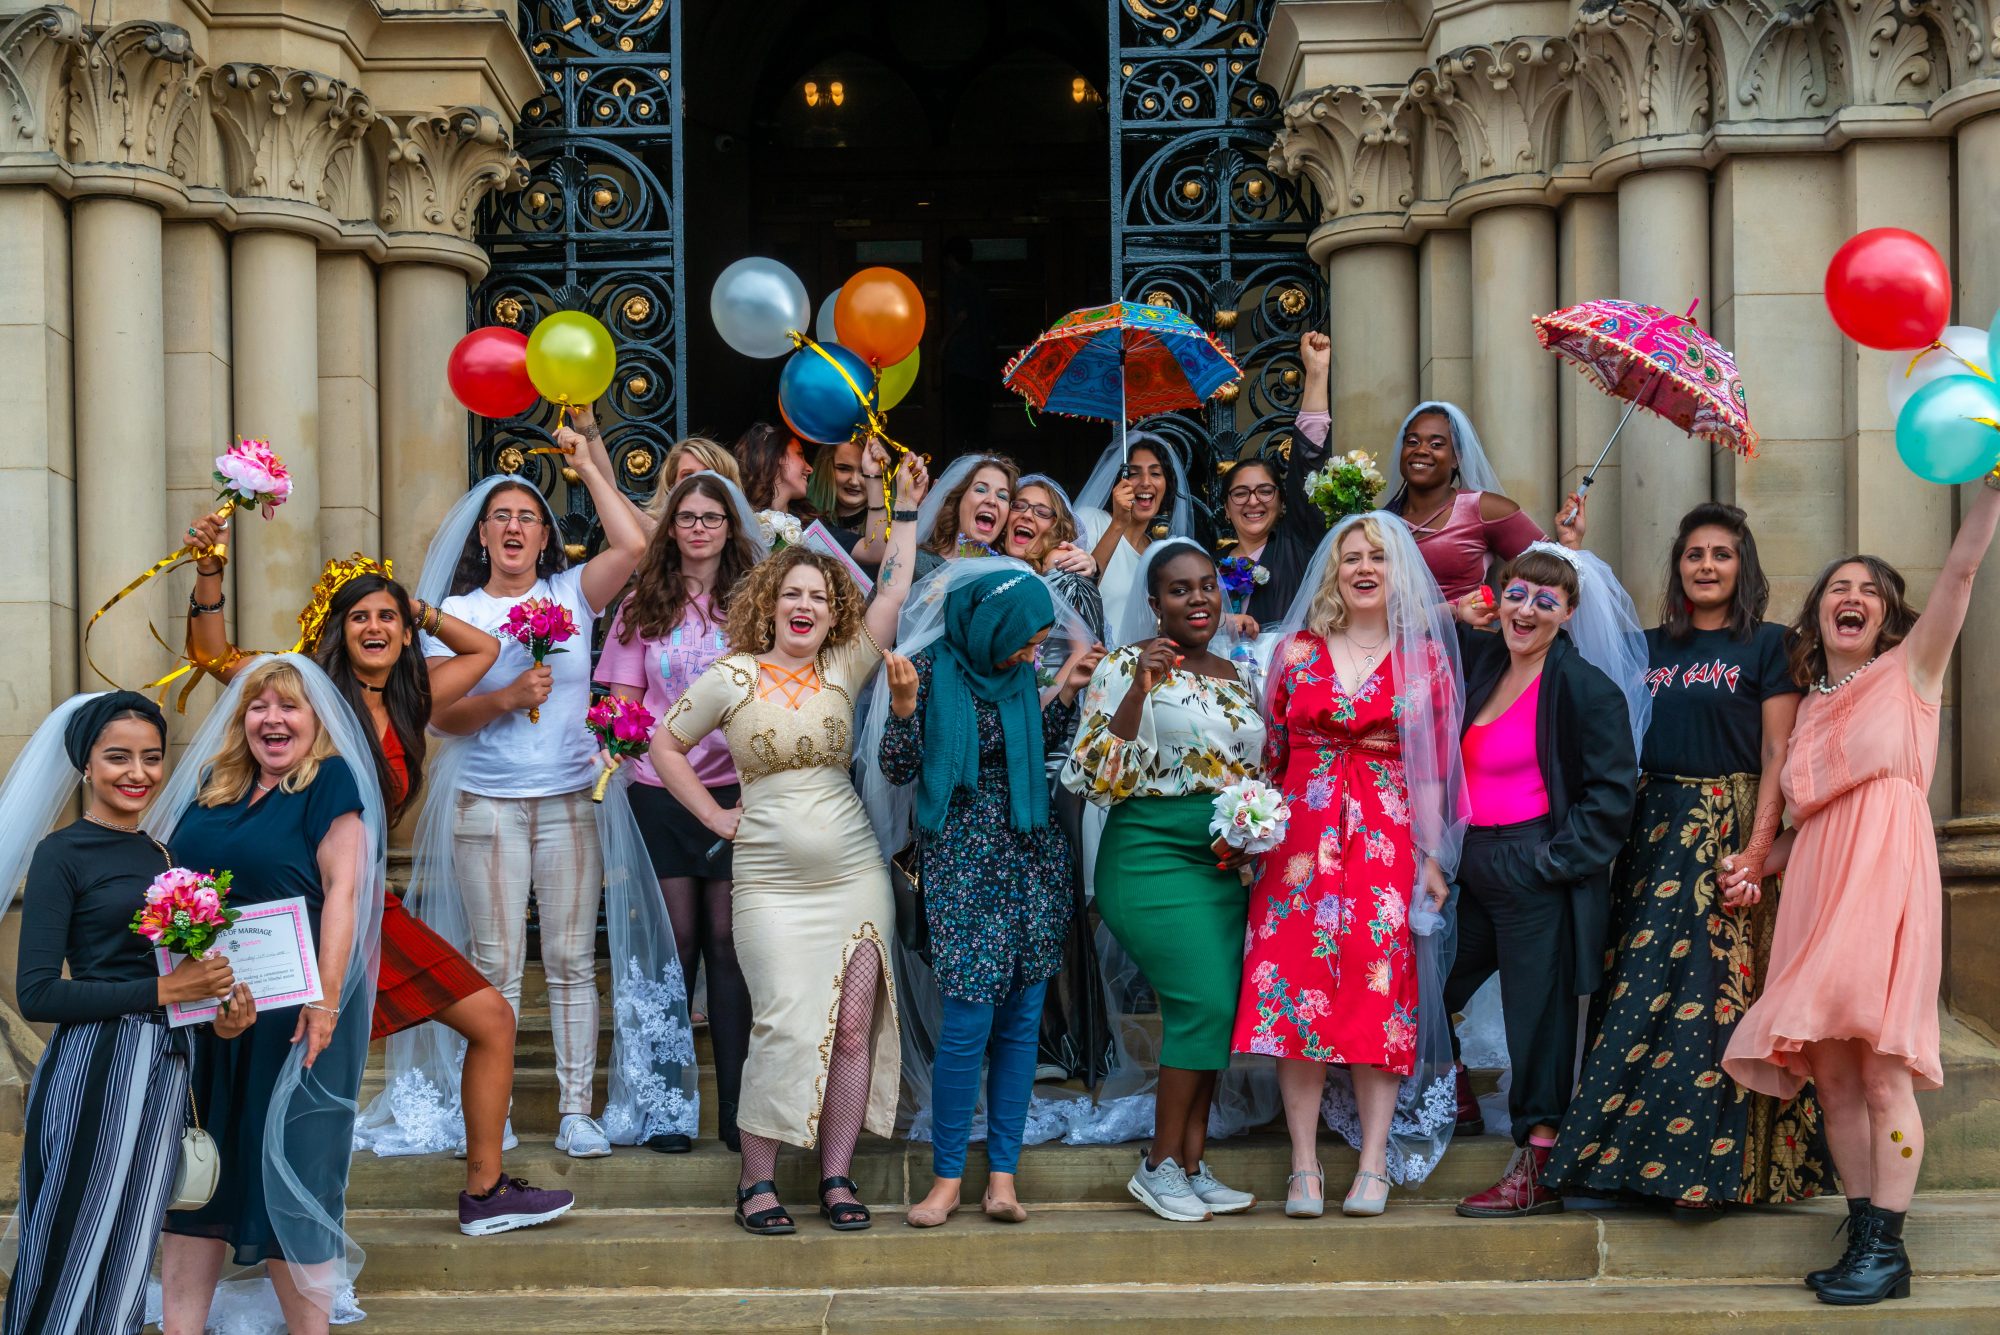 A celebratory photograph of colourful brides from the Wedding Of The Year, a socially engaged piece where women married themselves.